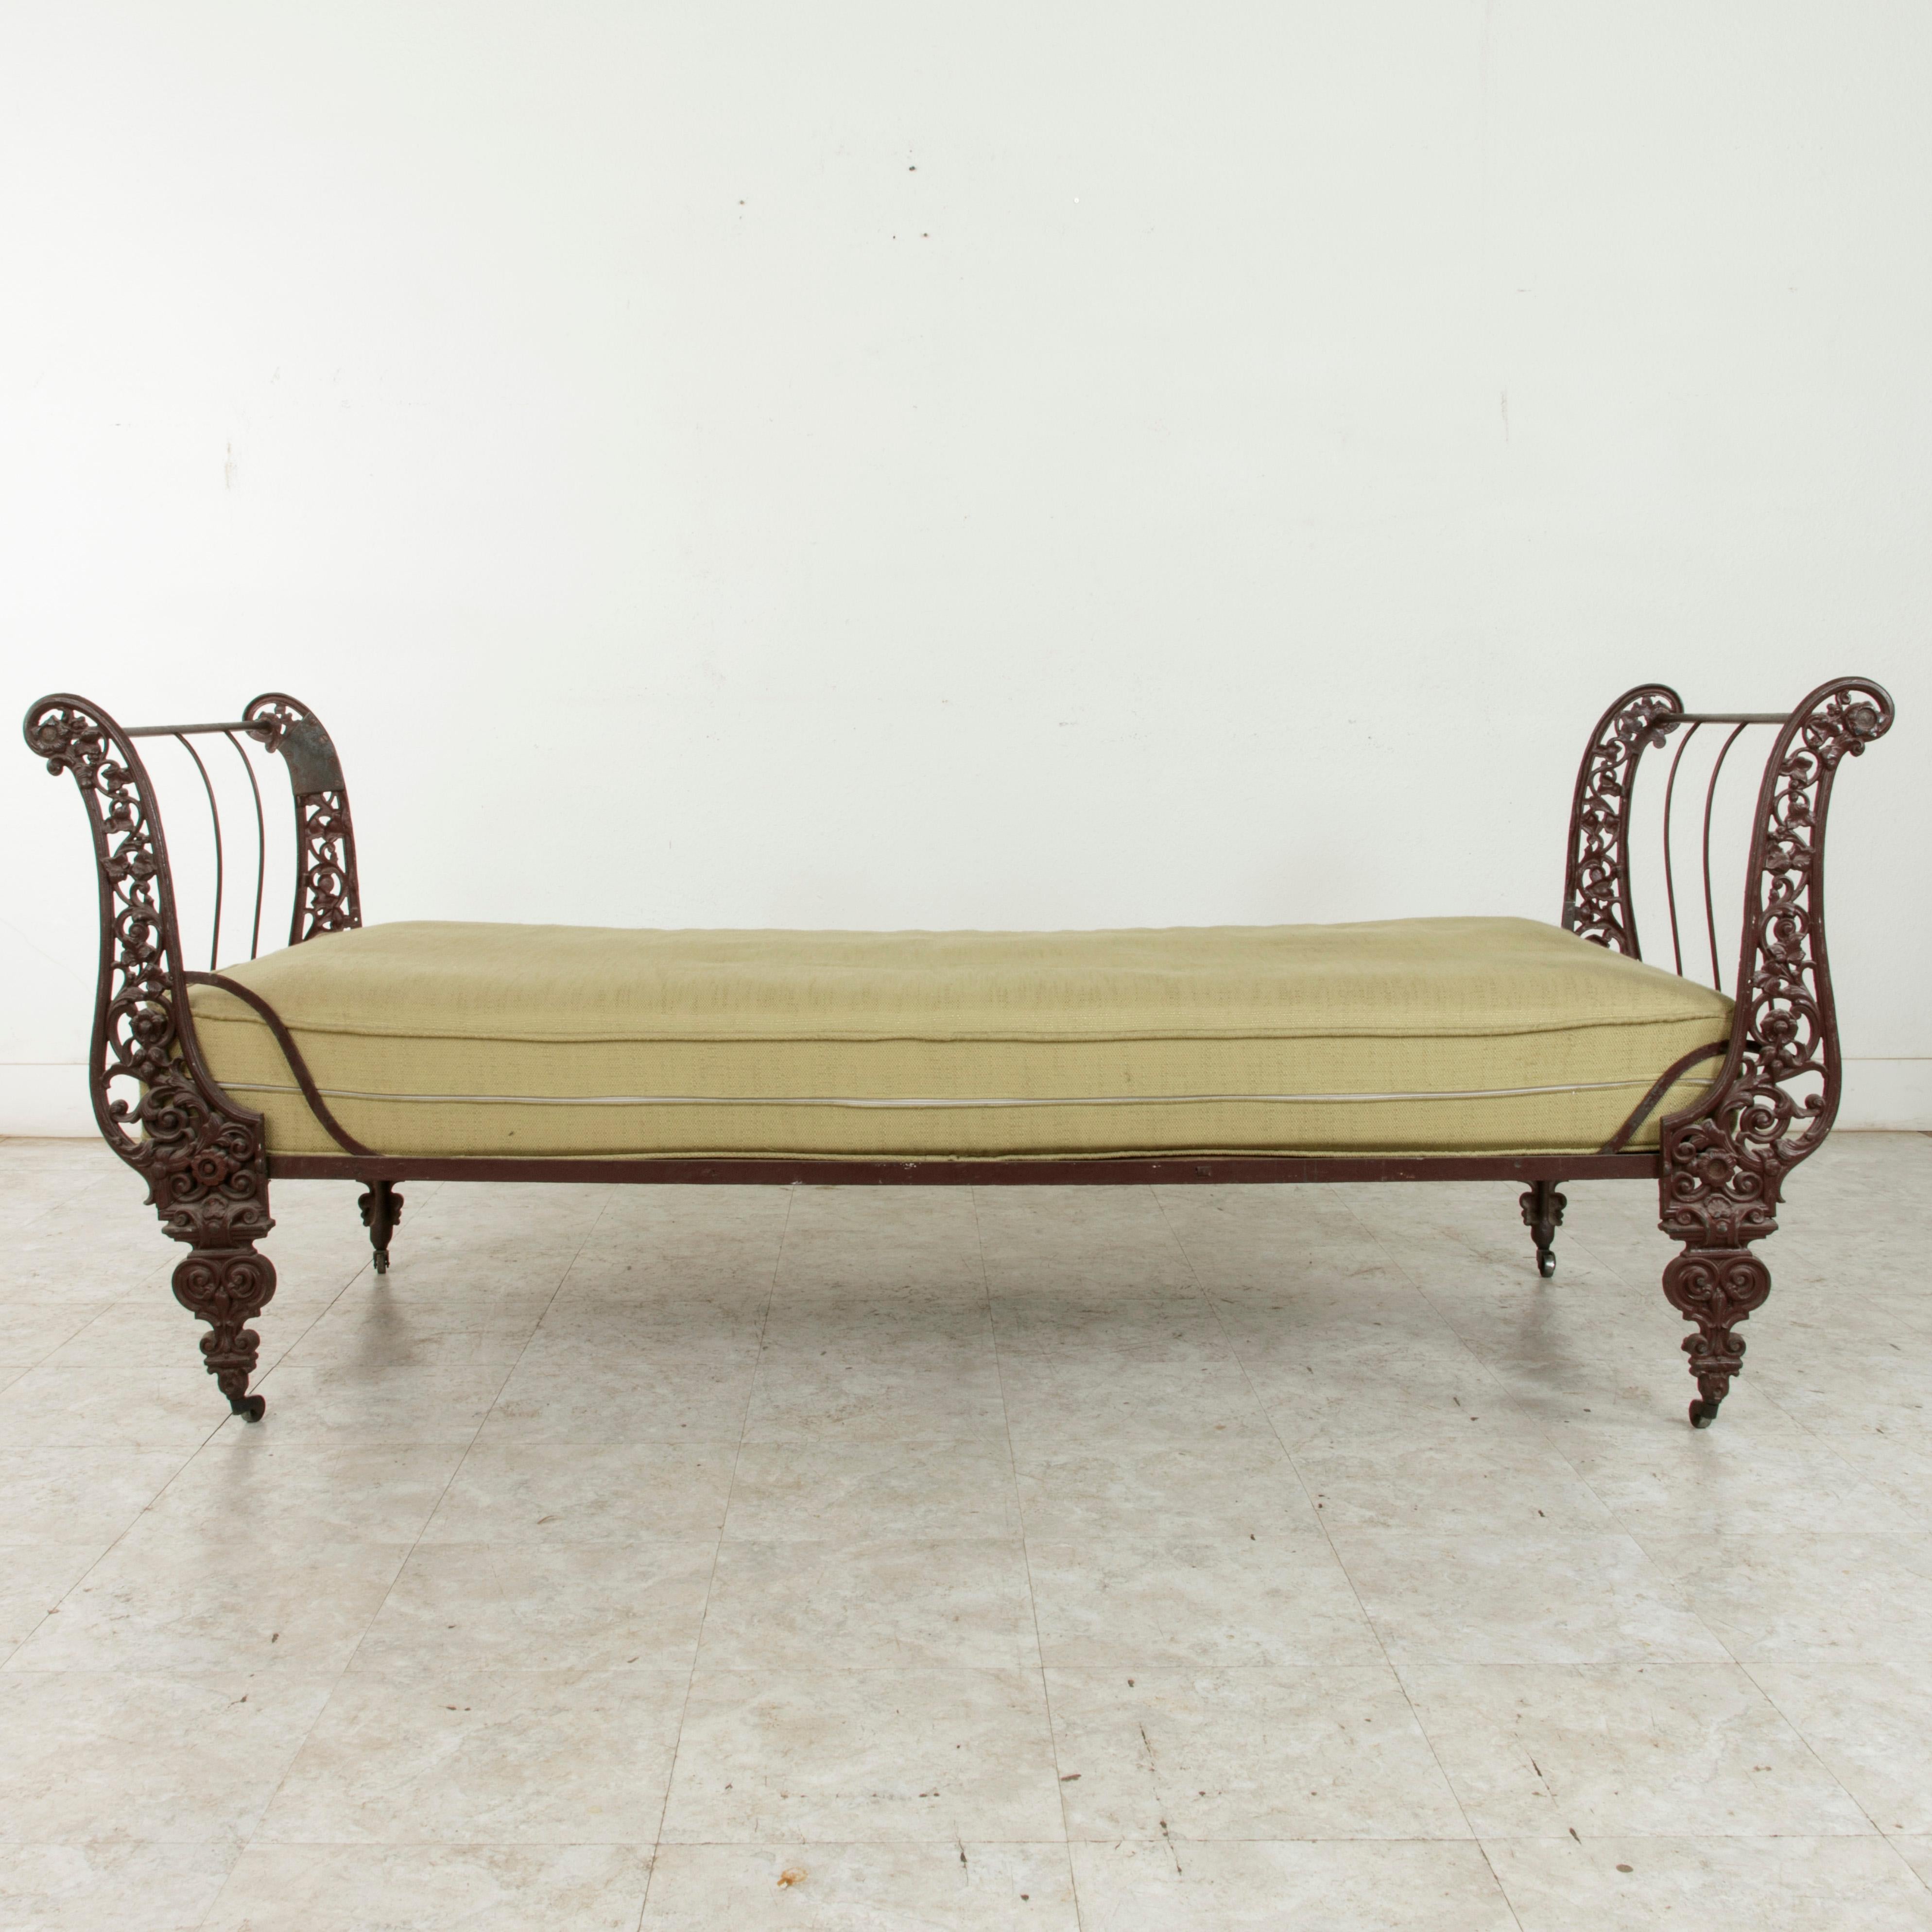 19th Century French Napoleon III Period Cast Iron Daybed or Sleigh Bed 2